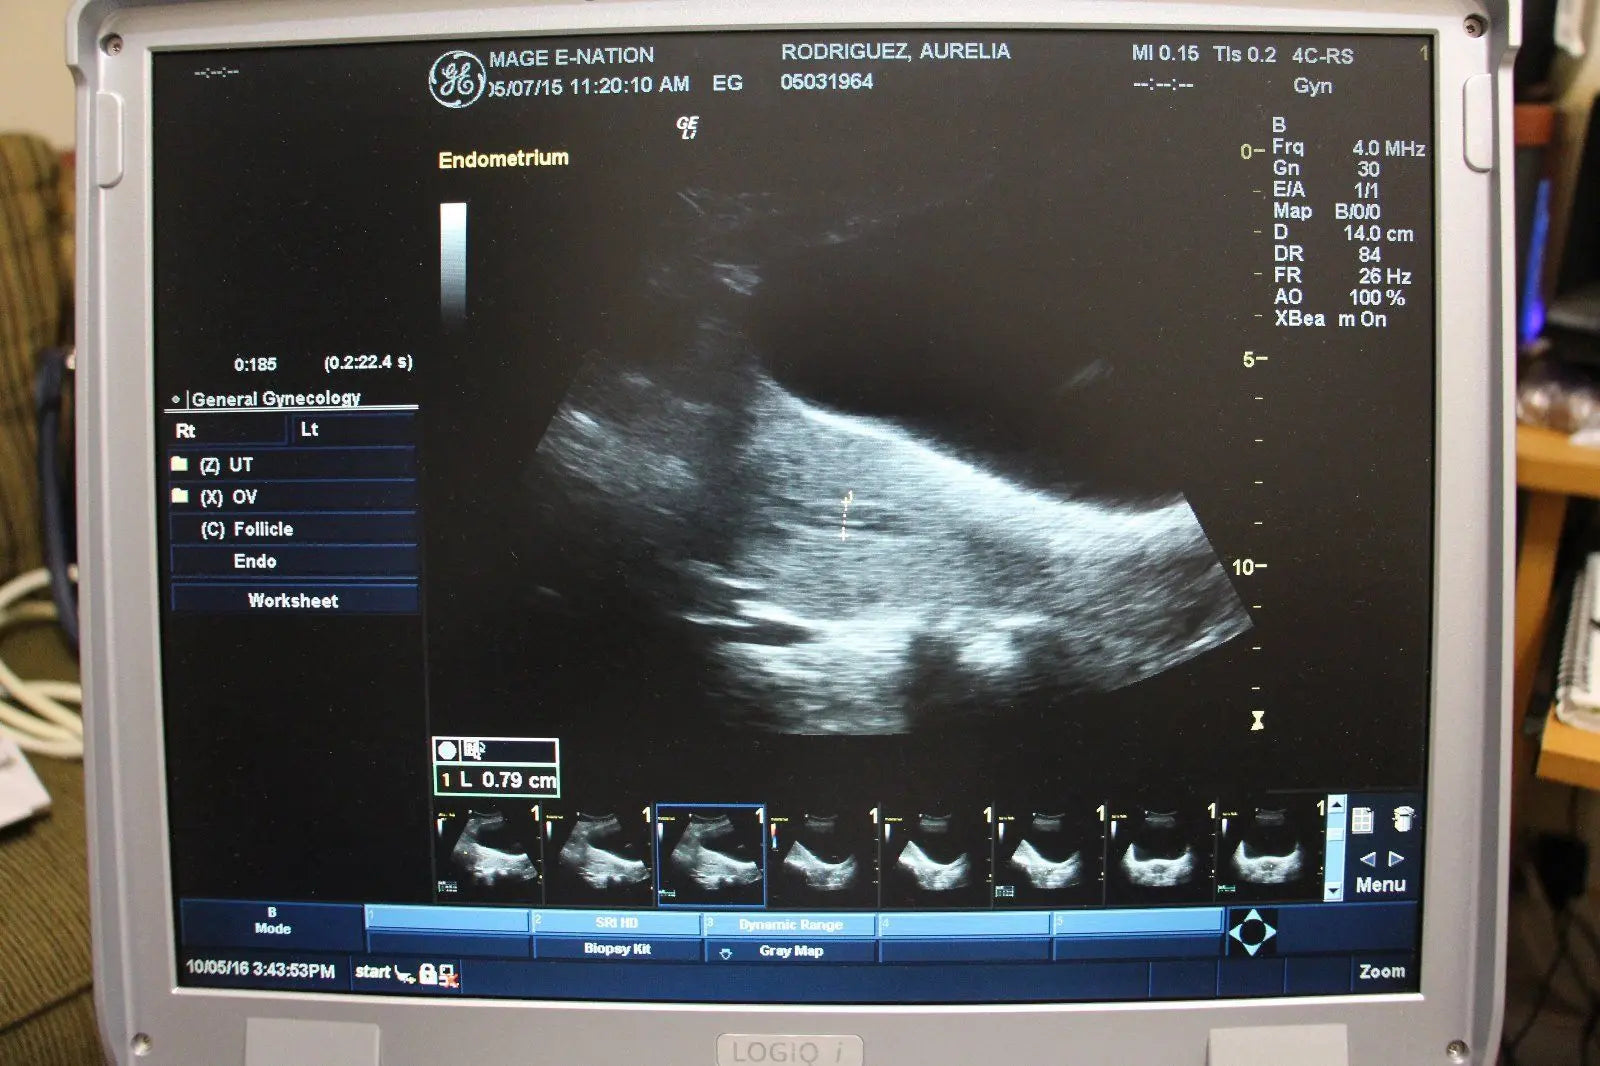 Portable Ultrasound Machine GE LOGIQ i 2007 with 2 Transducers DIAGNOSTIC ULTRASOUND MACHINES FOR SALE